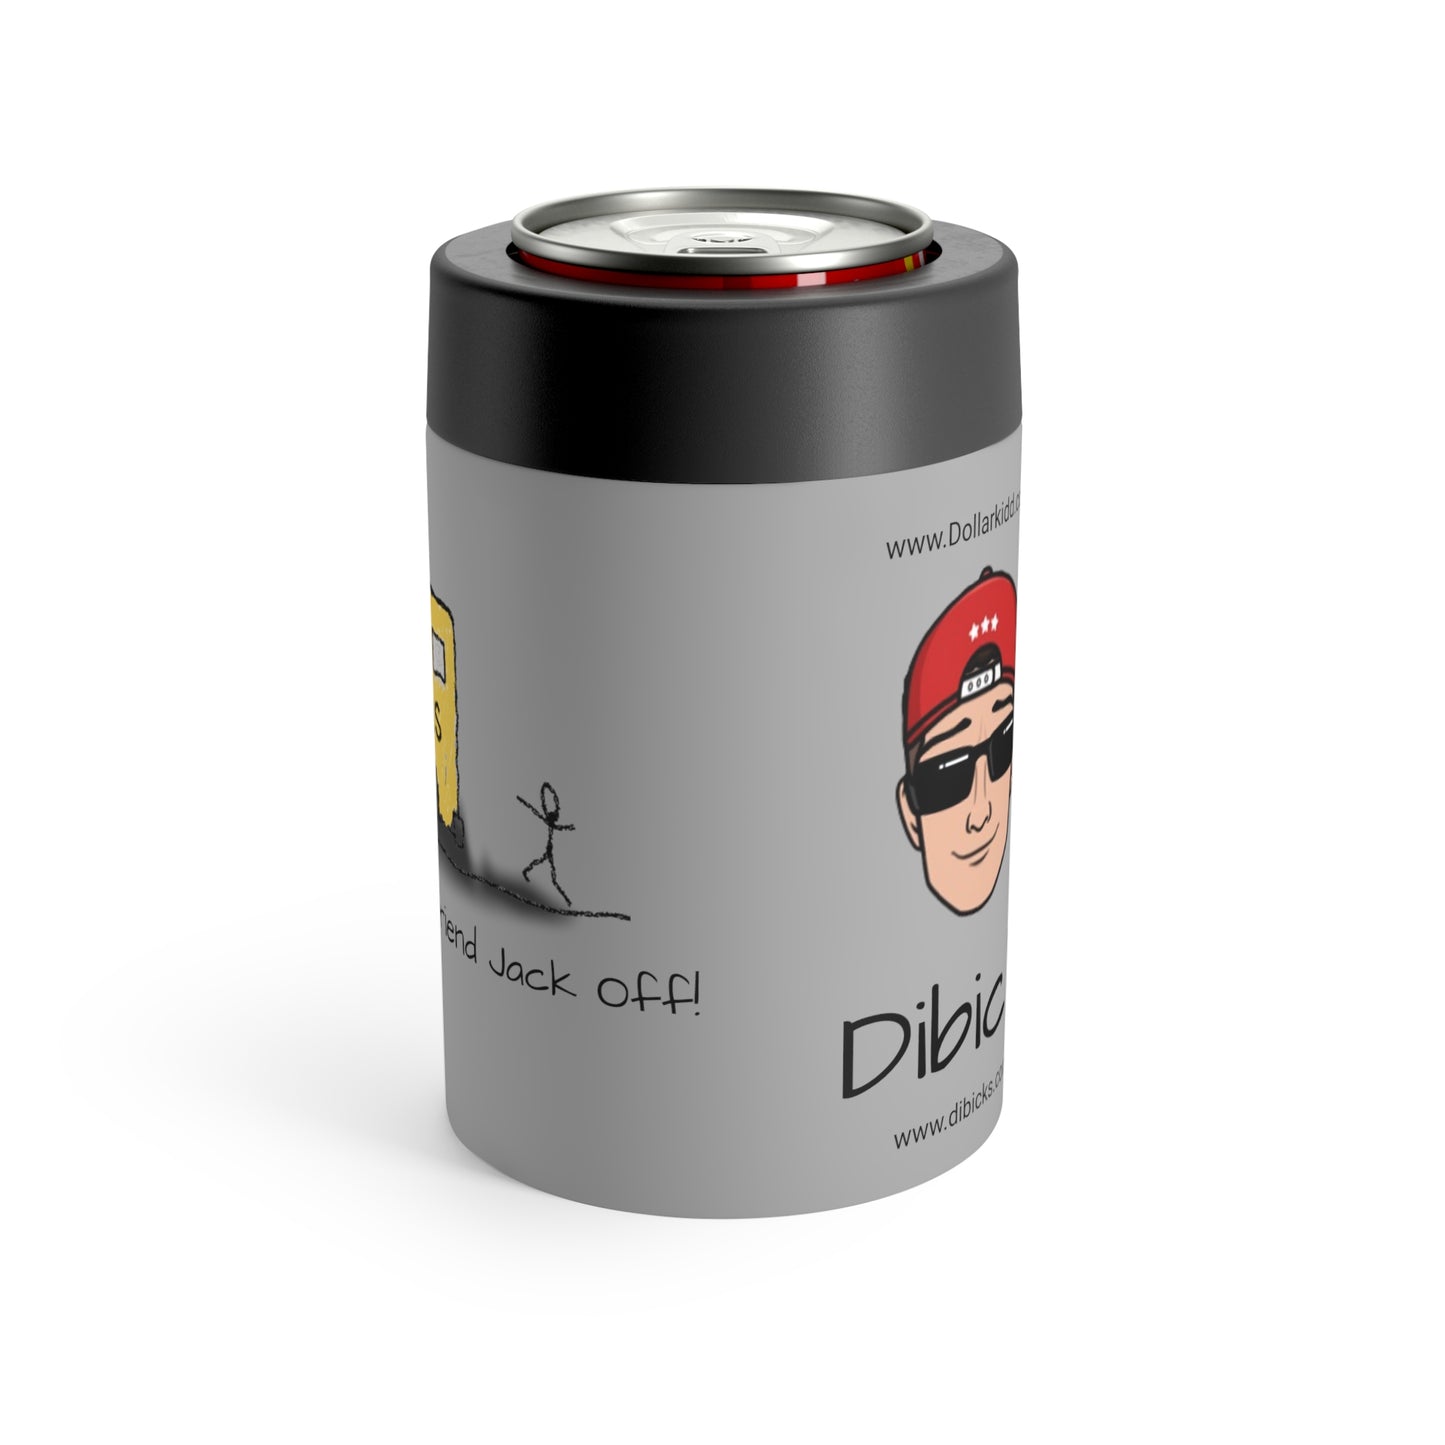 Dibick "Stop the bus" Can Holder